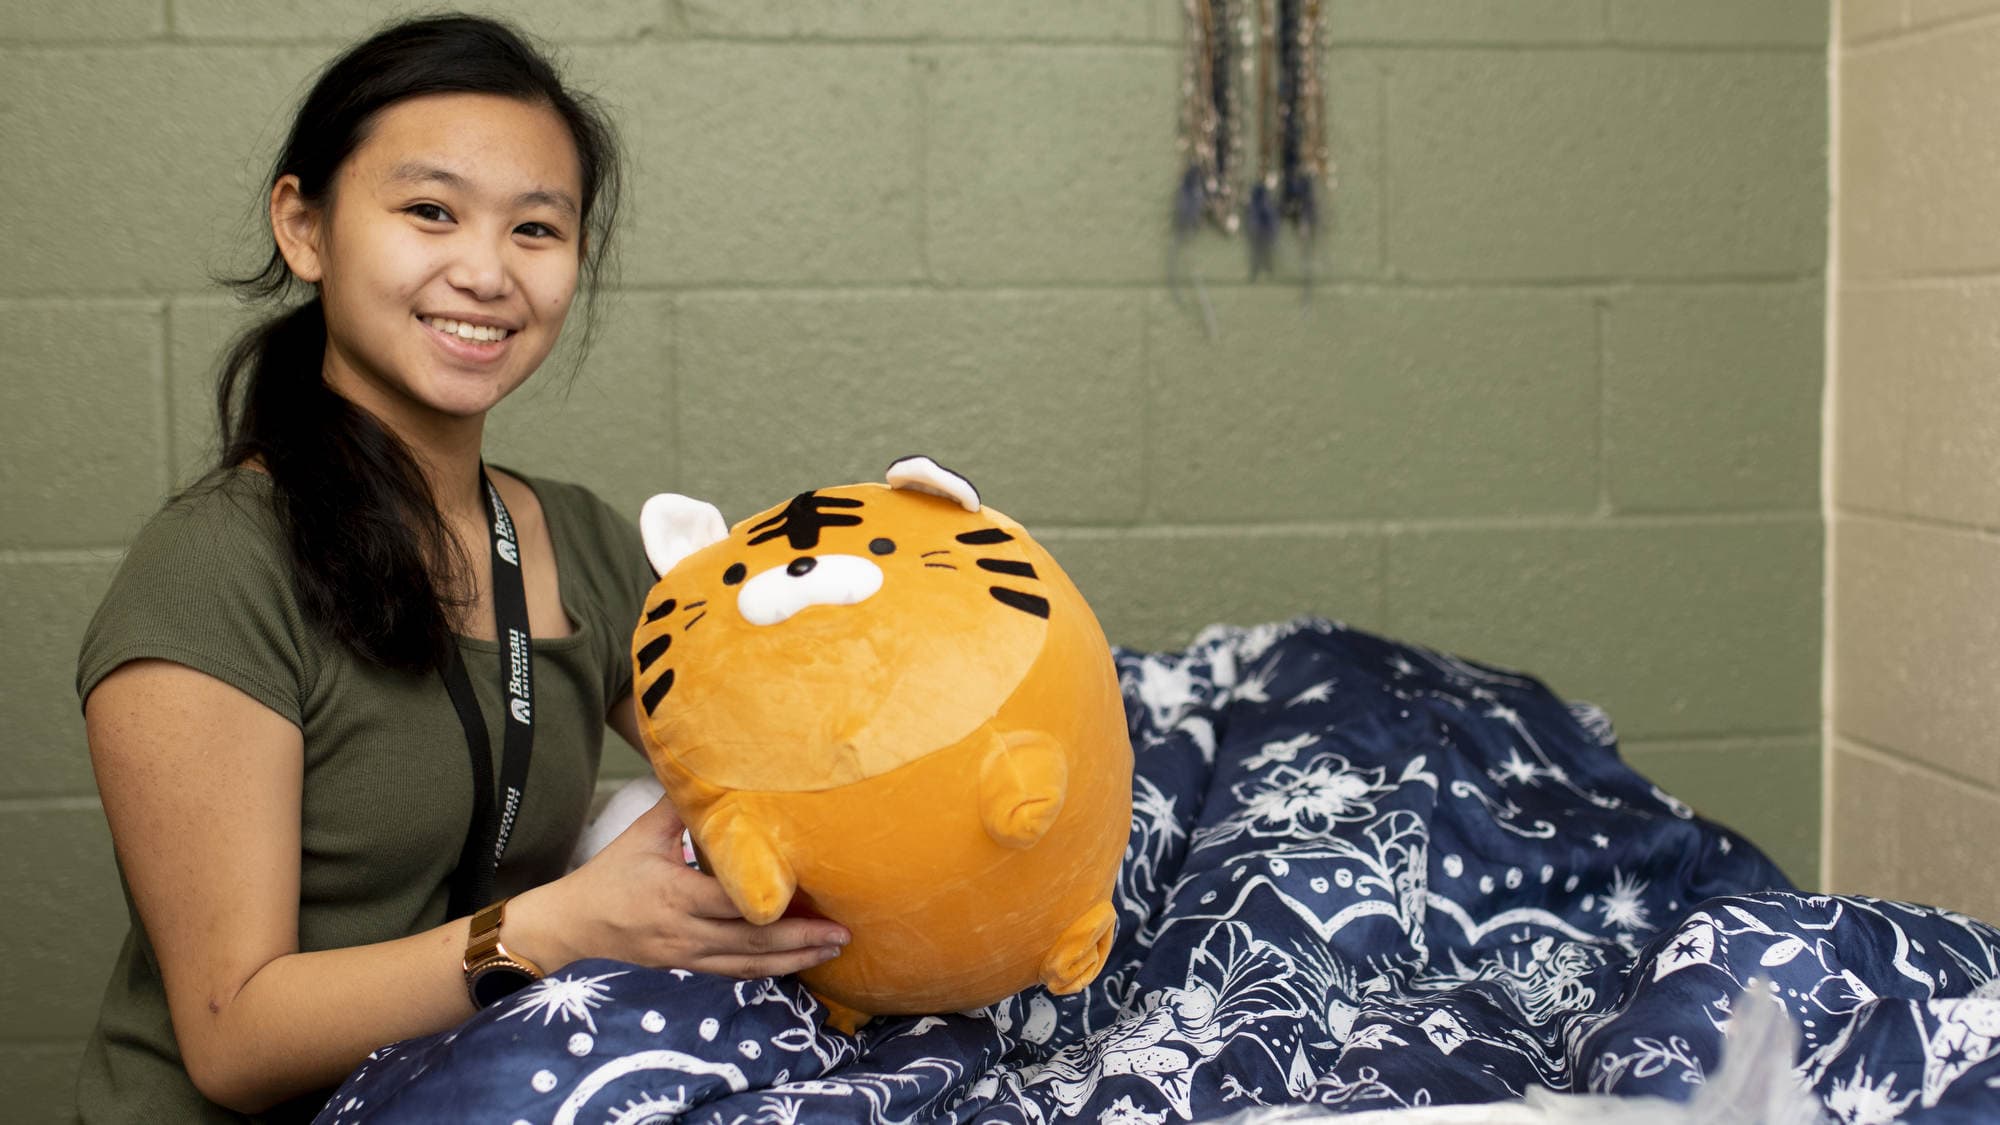 Eleanor Lee moves into her dorm room